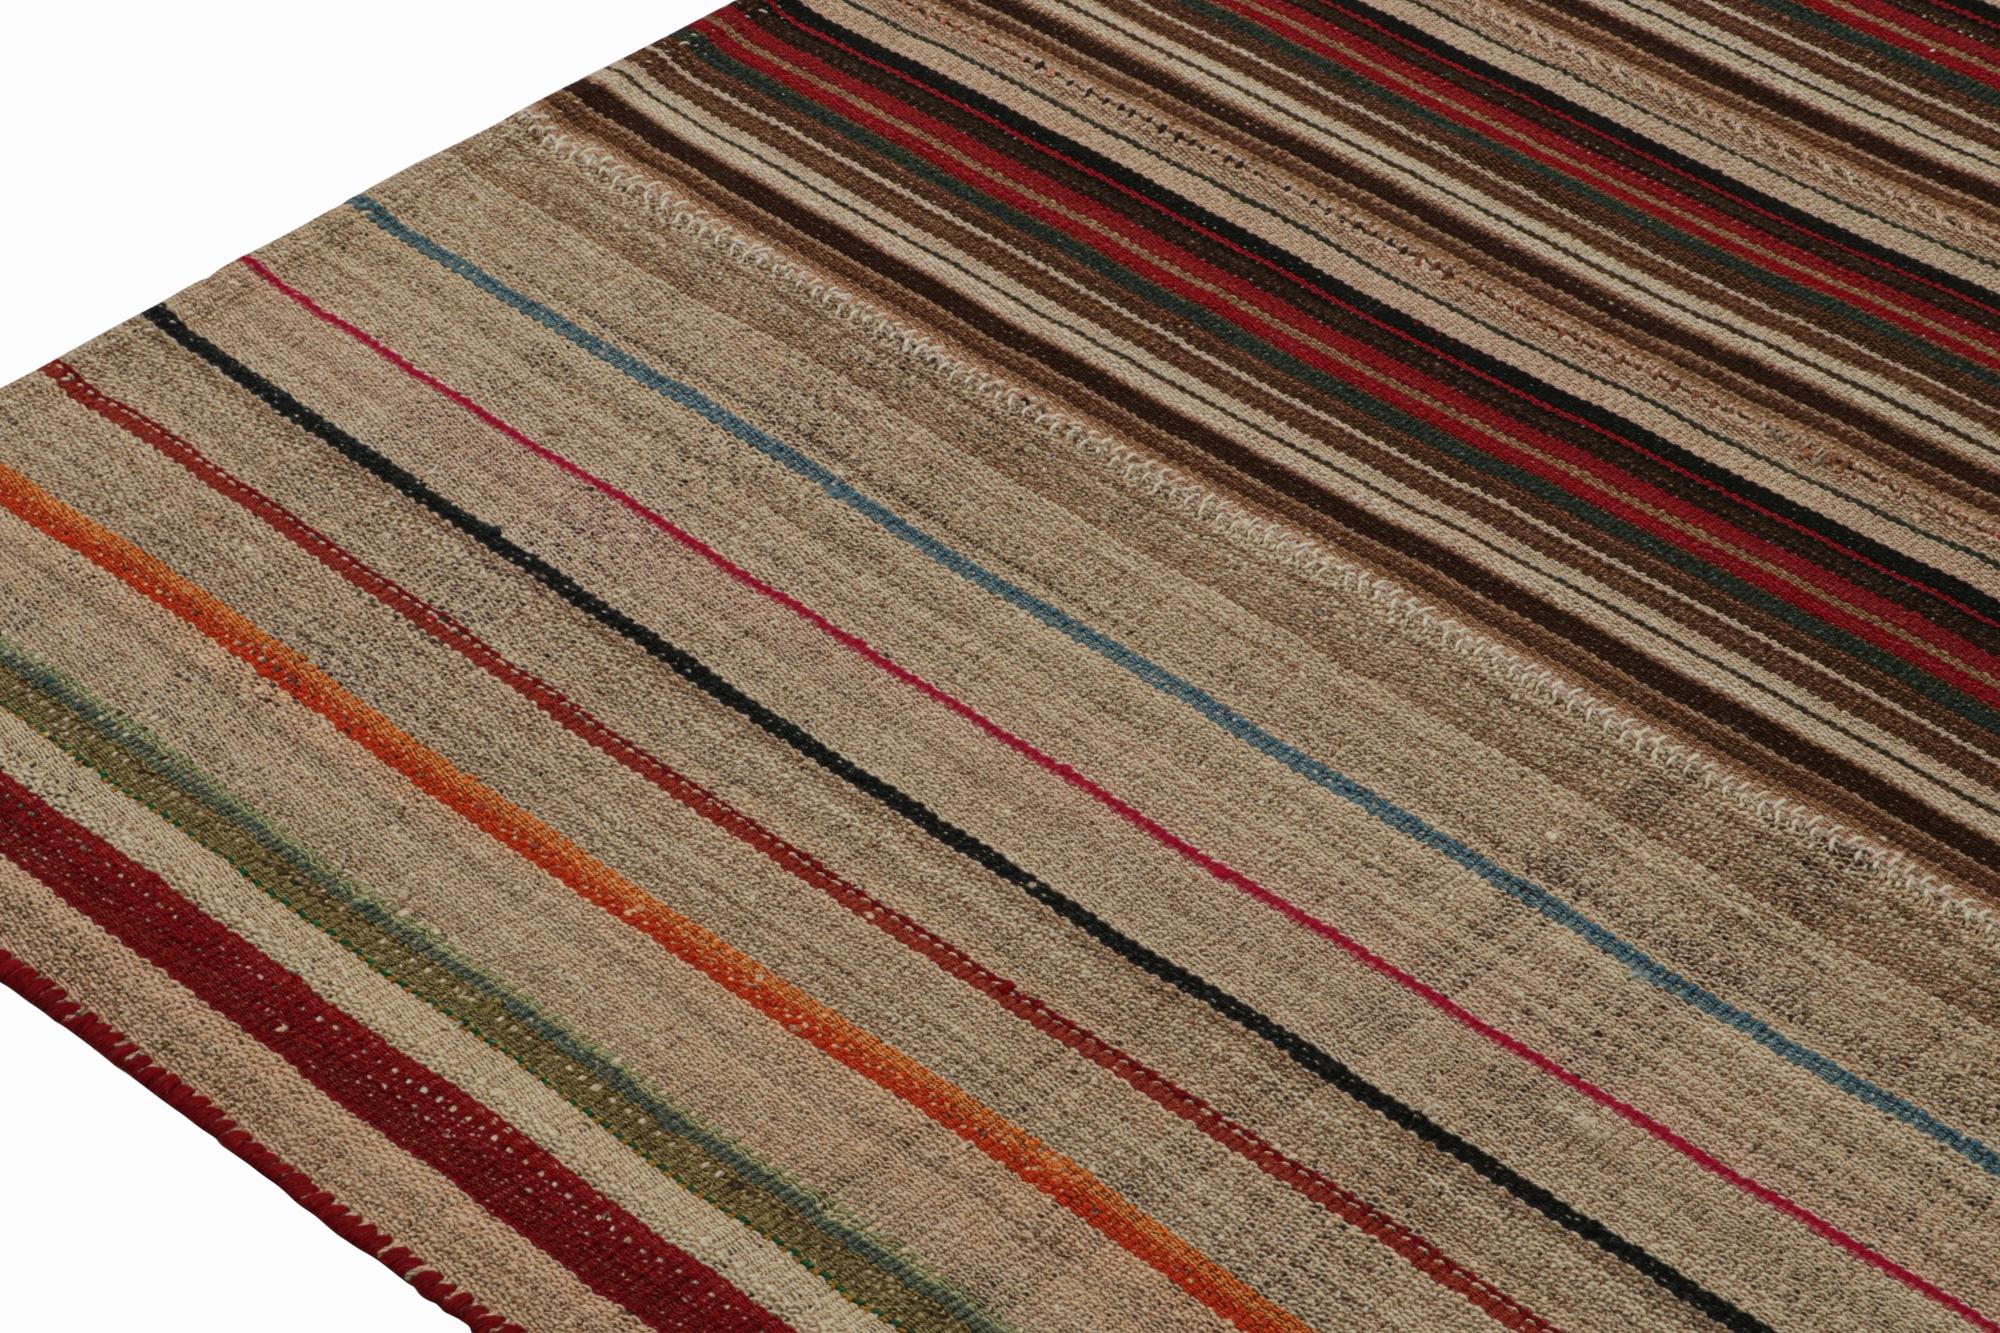 Vintage Persian Kilim in Beige-Brown Stripes in Panel Style In Good Condition For Sale In Long Island City, NY